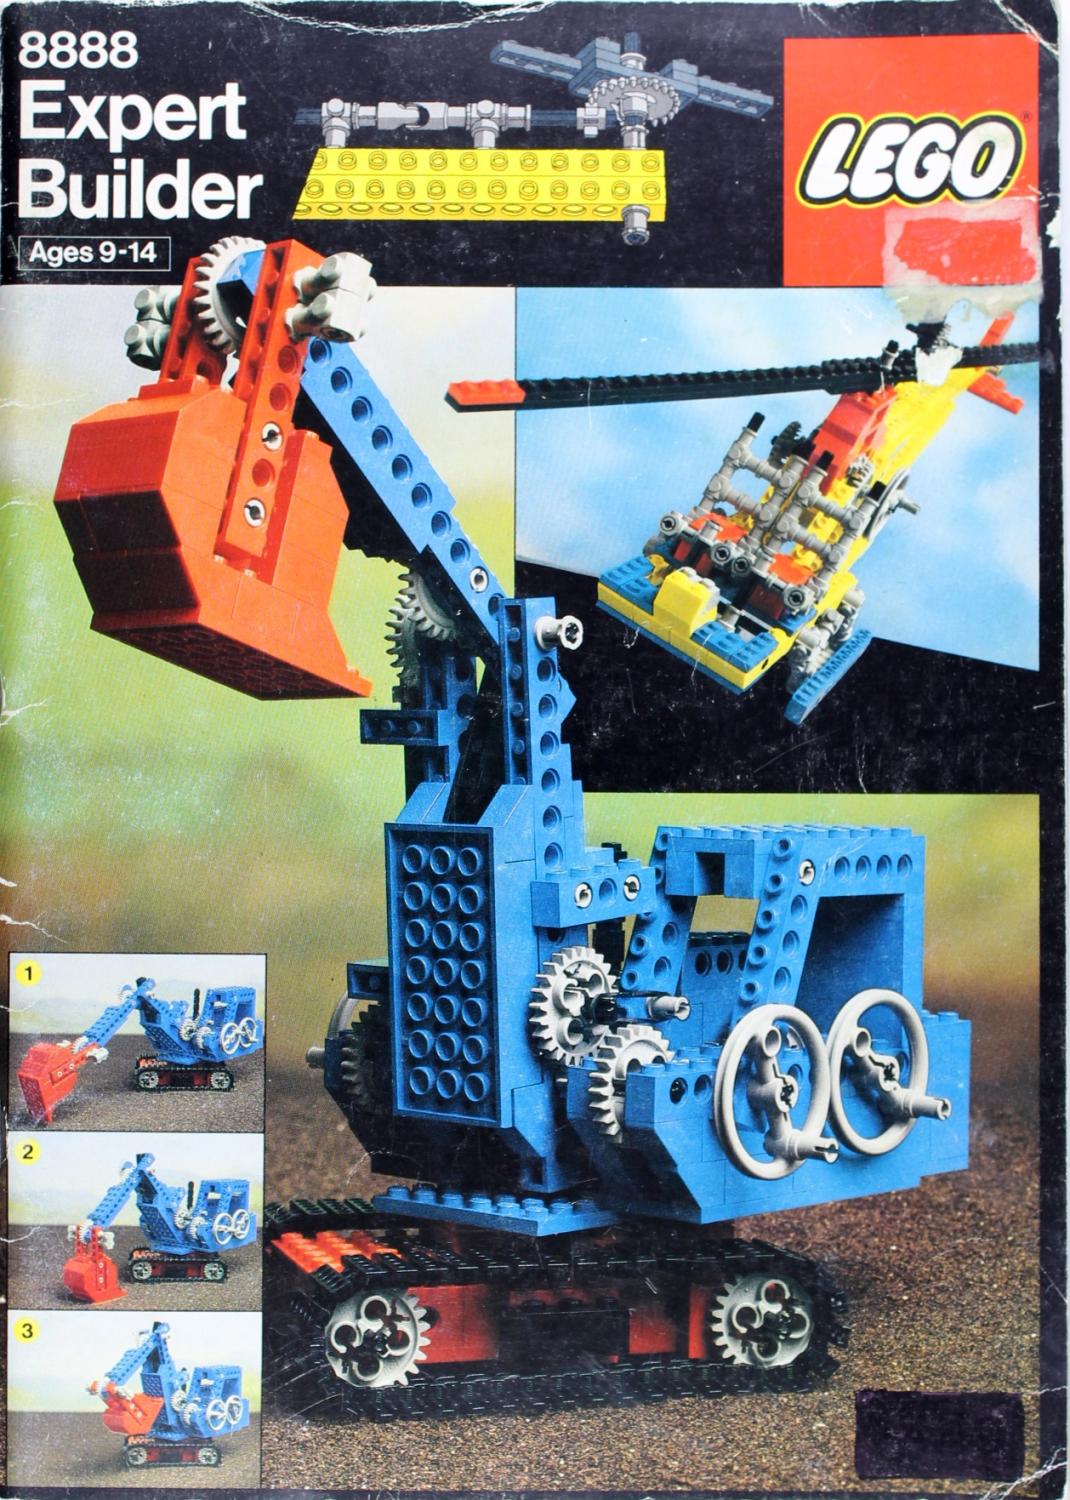 modstand Sovesal Disco Lego Expert Builder #8888 by Lego: Used Good Trade Paperback (1980) |  Firefly Bookstore